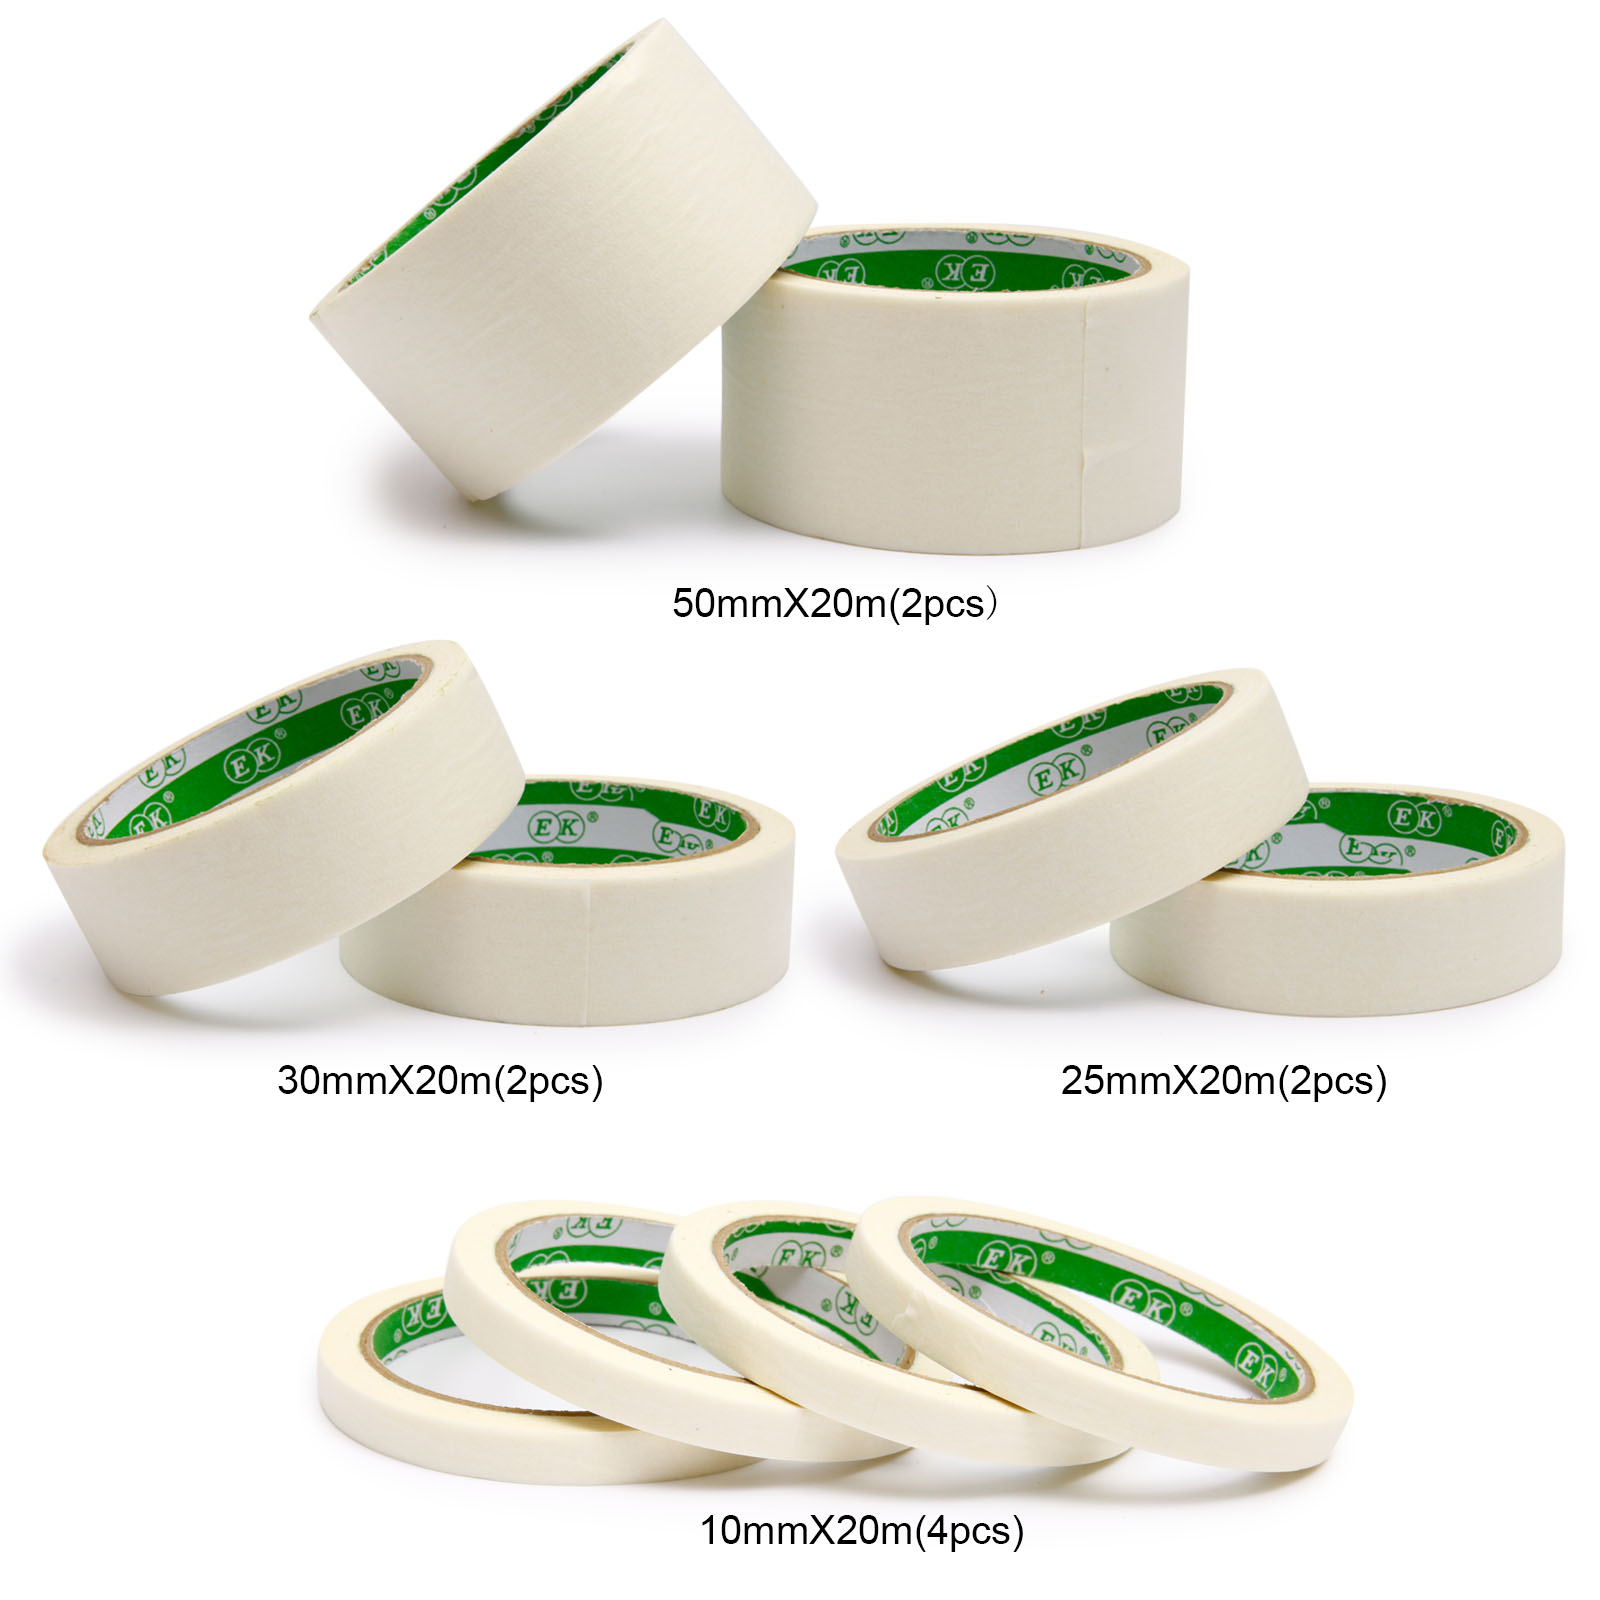 3 Rolls Masking Tape For Indoor Outdoor Decorating